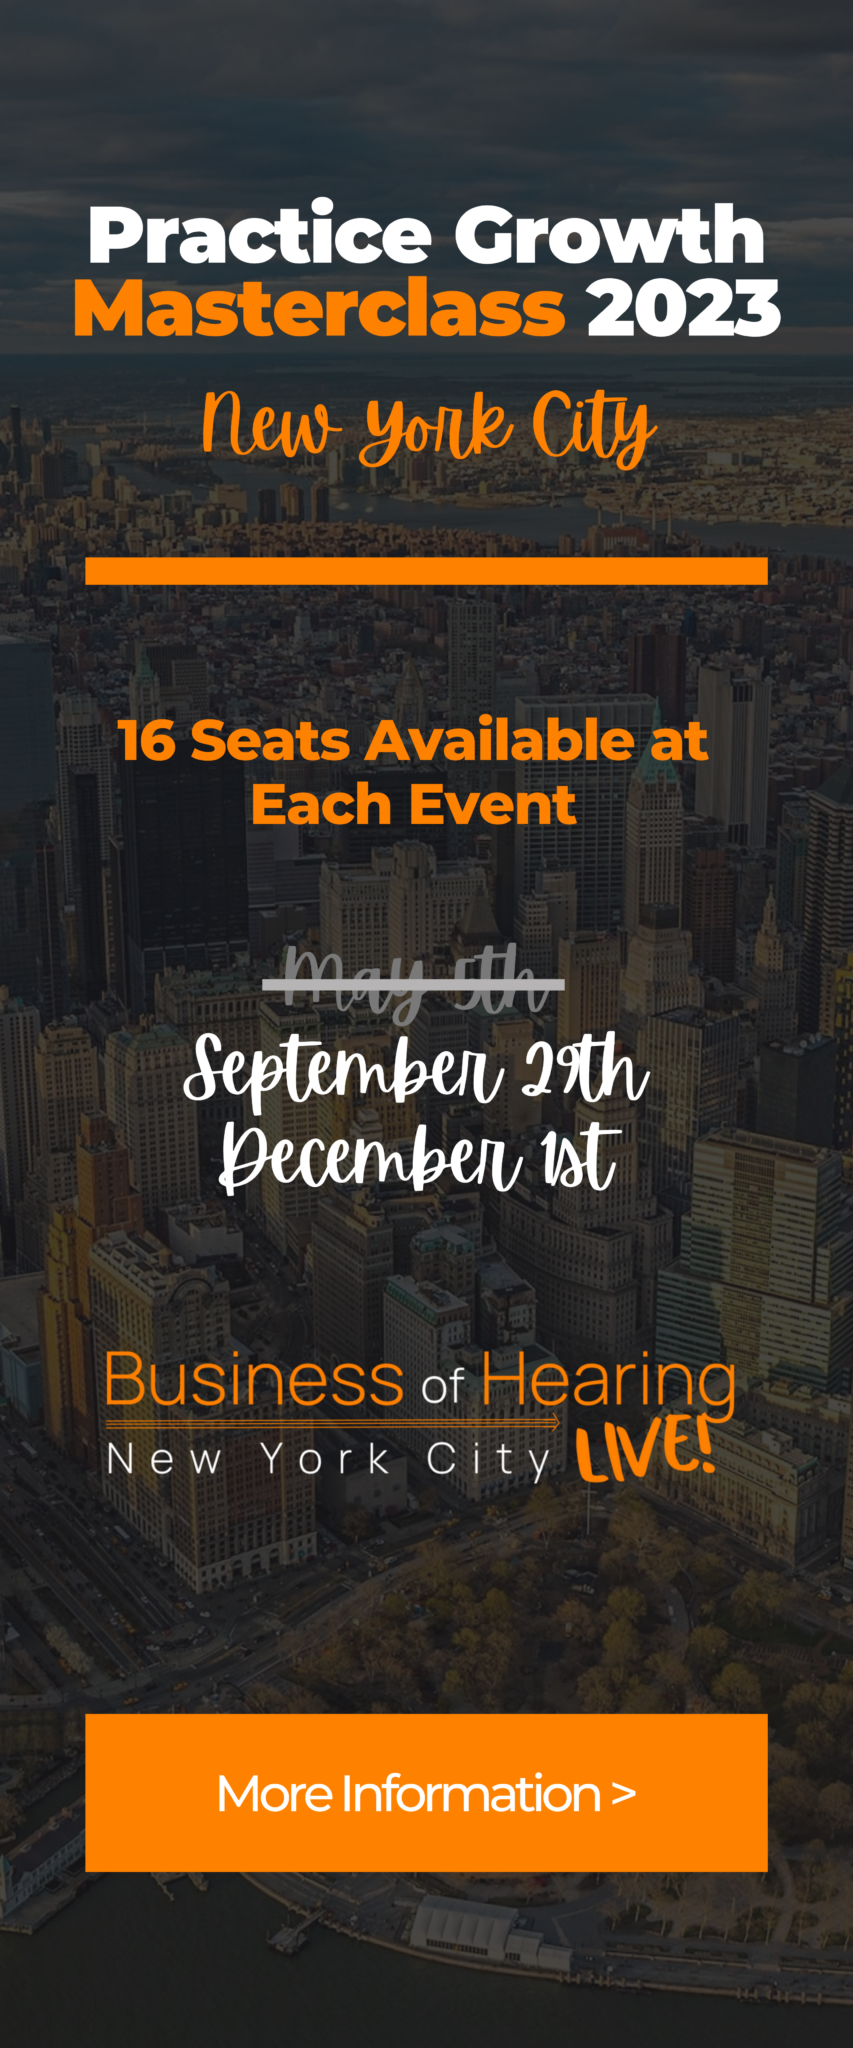 The Business Of Hearing Live Event Information